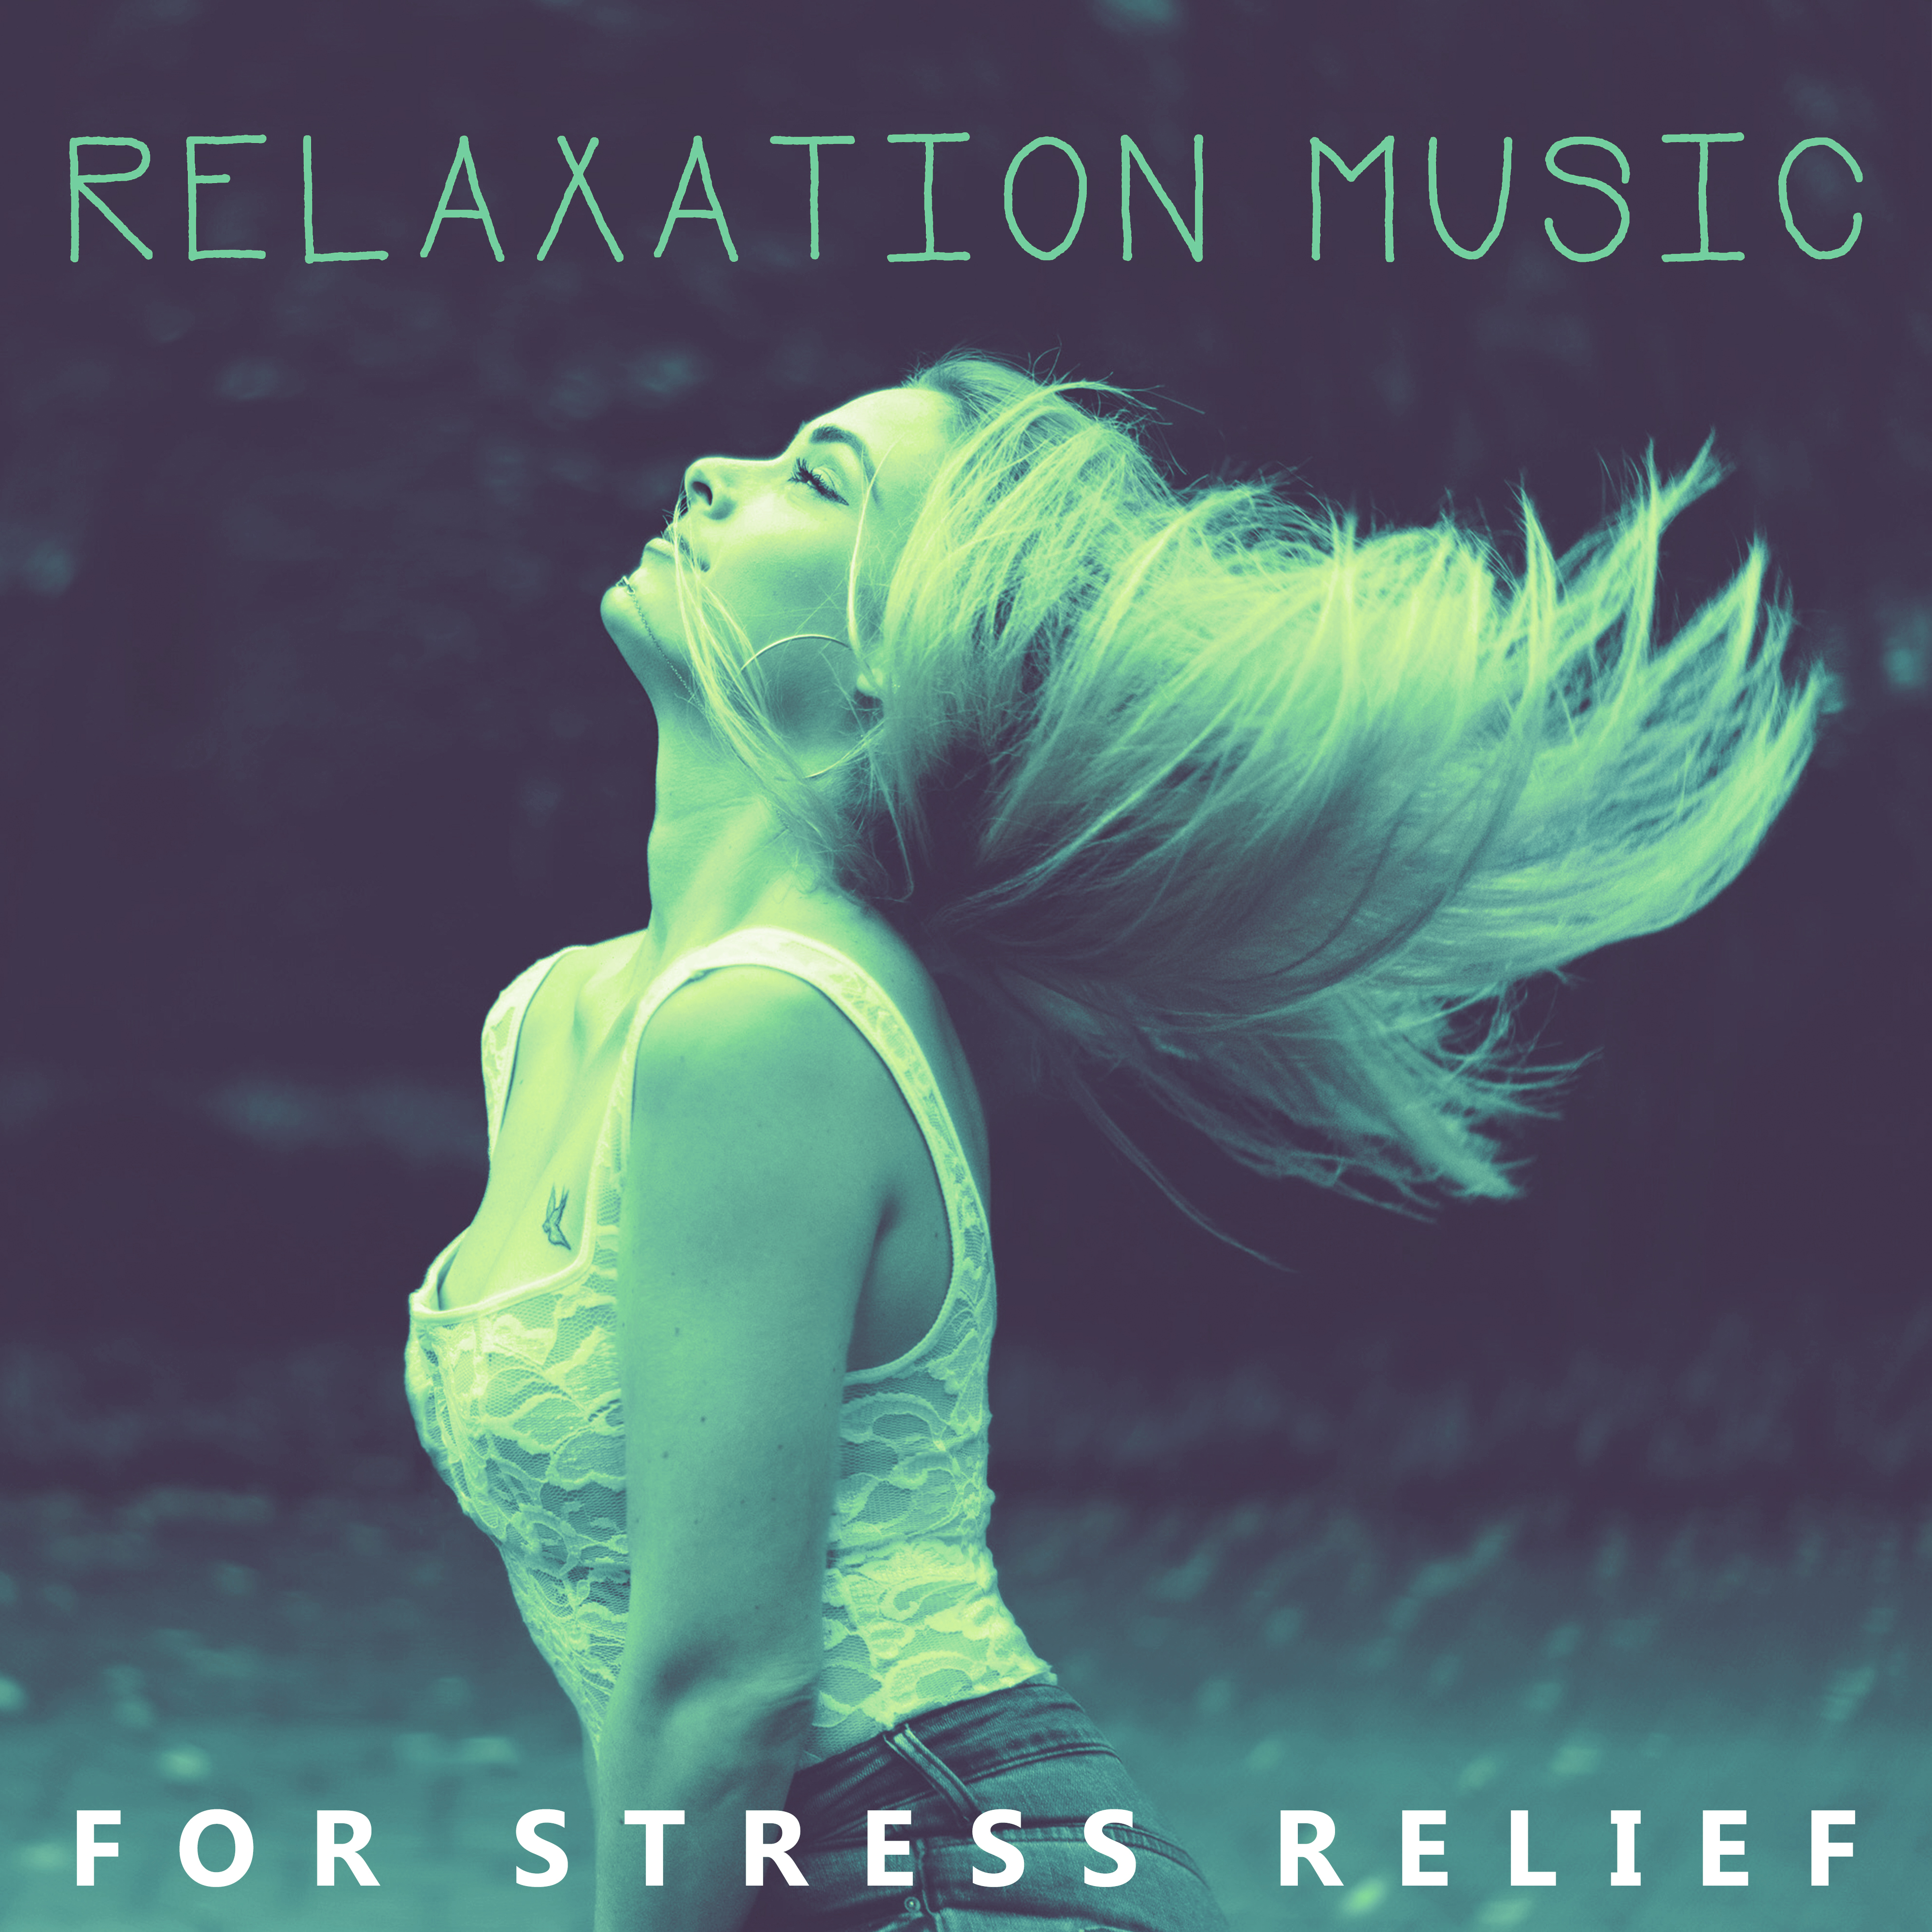 Relaxation Music for Stress Relief  Peaceful Music for Stress Relief, Full of Nature Sounds Help You Relax